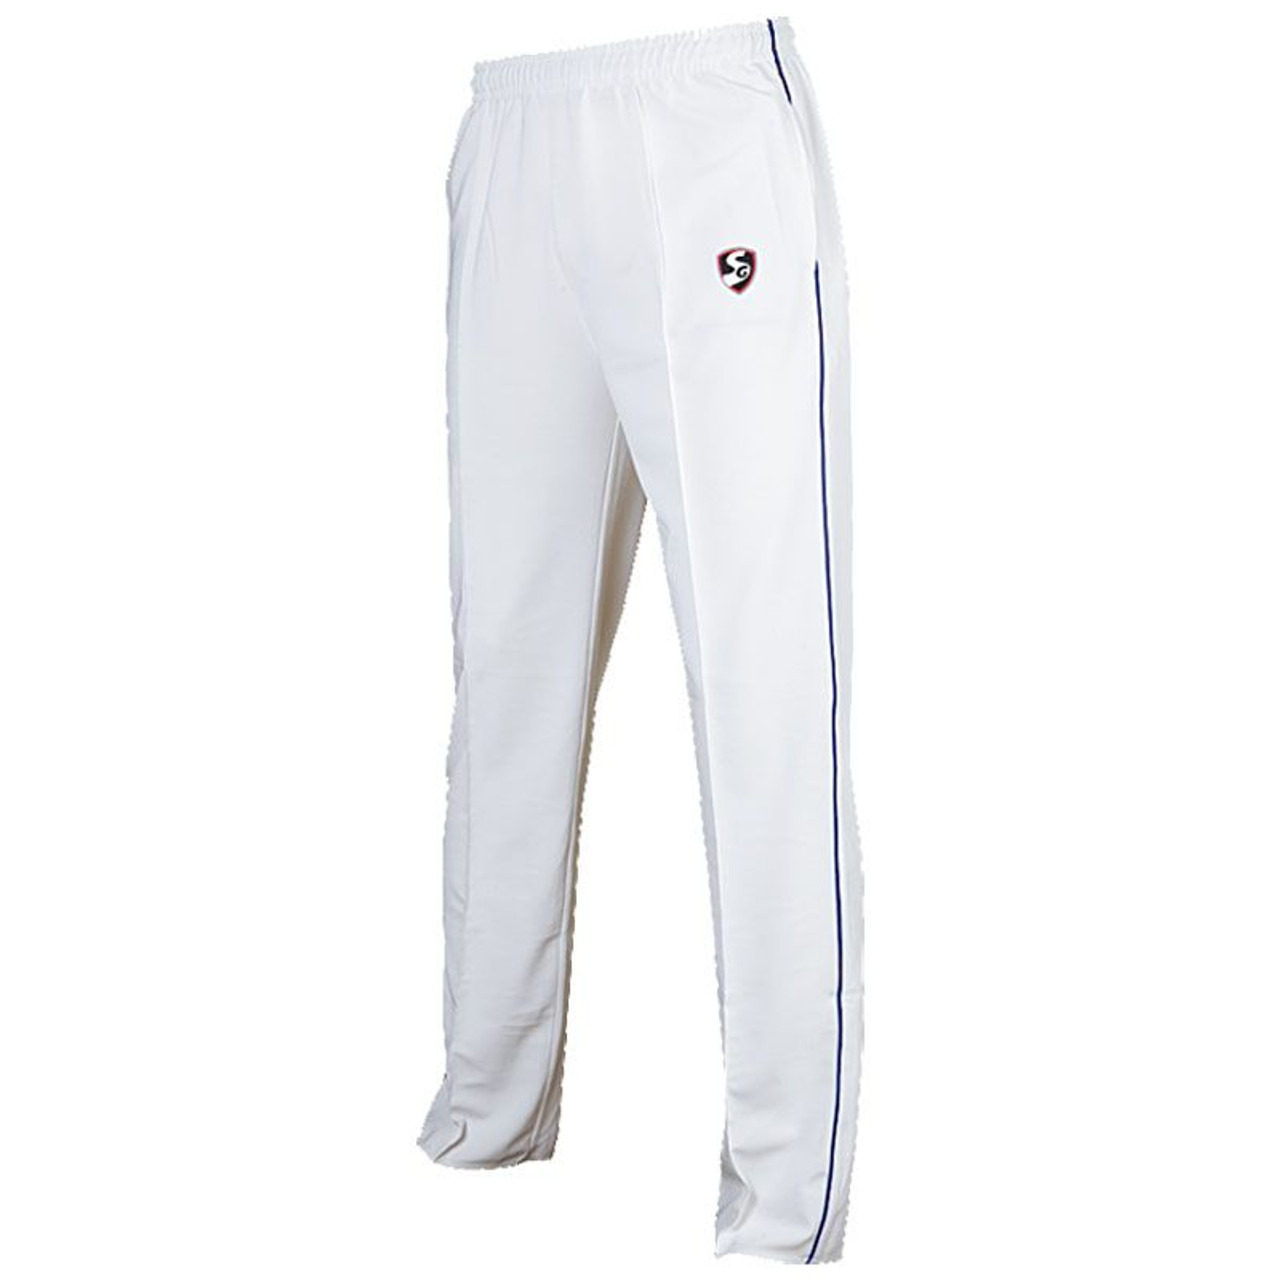 SG Century Cricket Pant  Buy Online India  Cricket Clothing Kit  Whites   See Price Photos  Features  Specialist Cricket Shop India